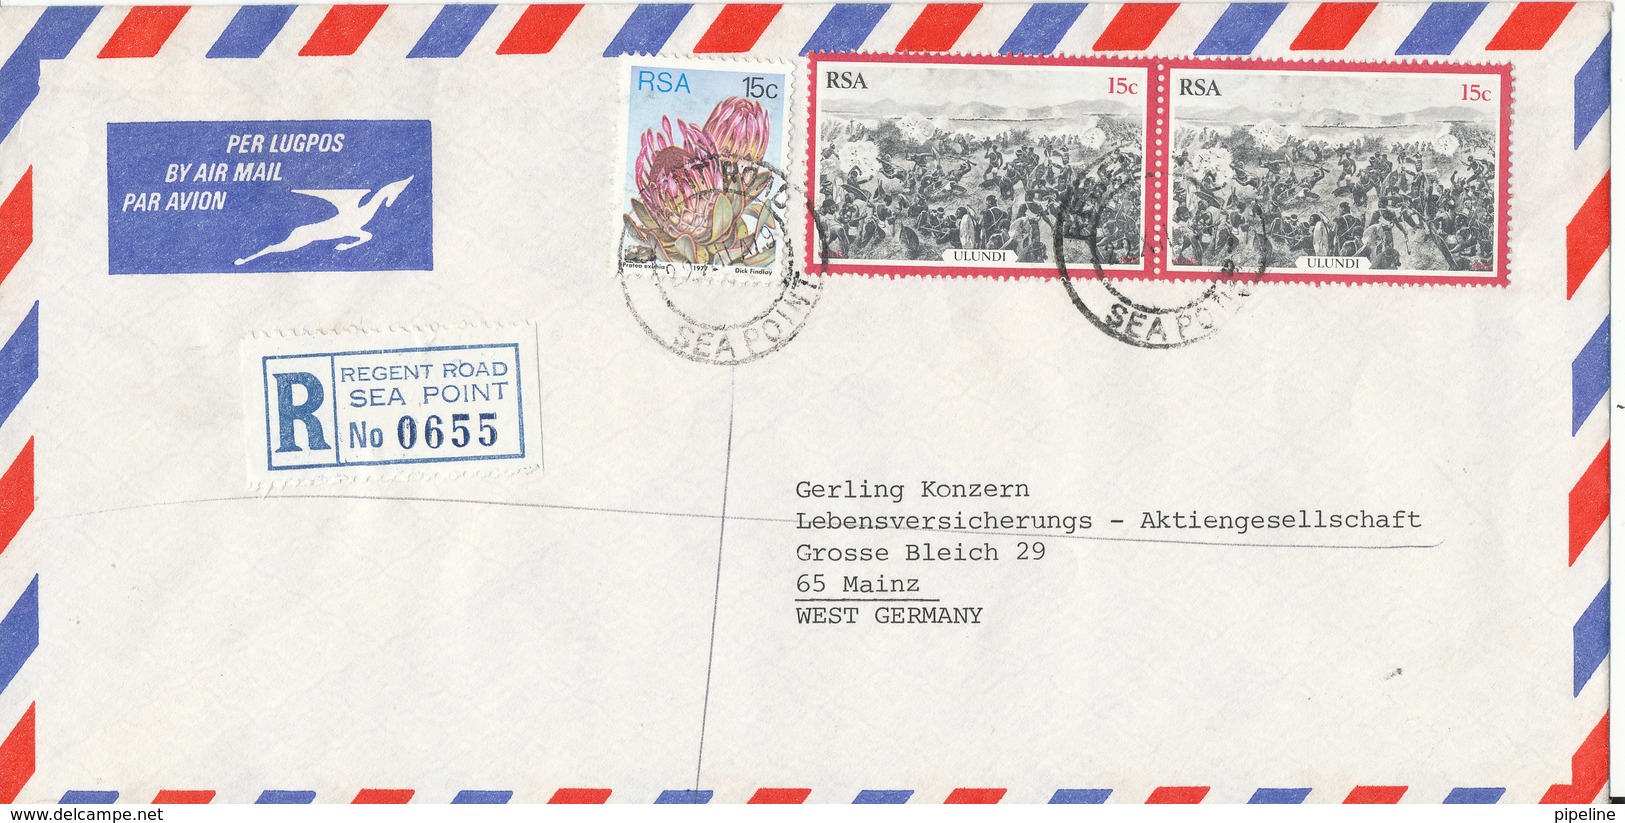 South Africa Registered Air Mail Cover Sent To Germany Regent Road Sea Point 2-12-1979 - Covers & Documents